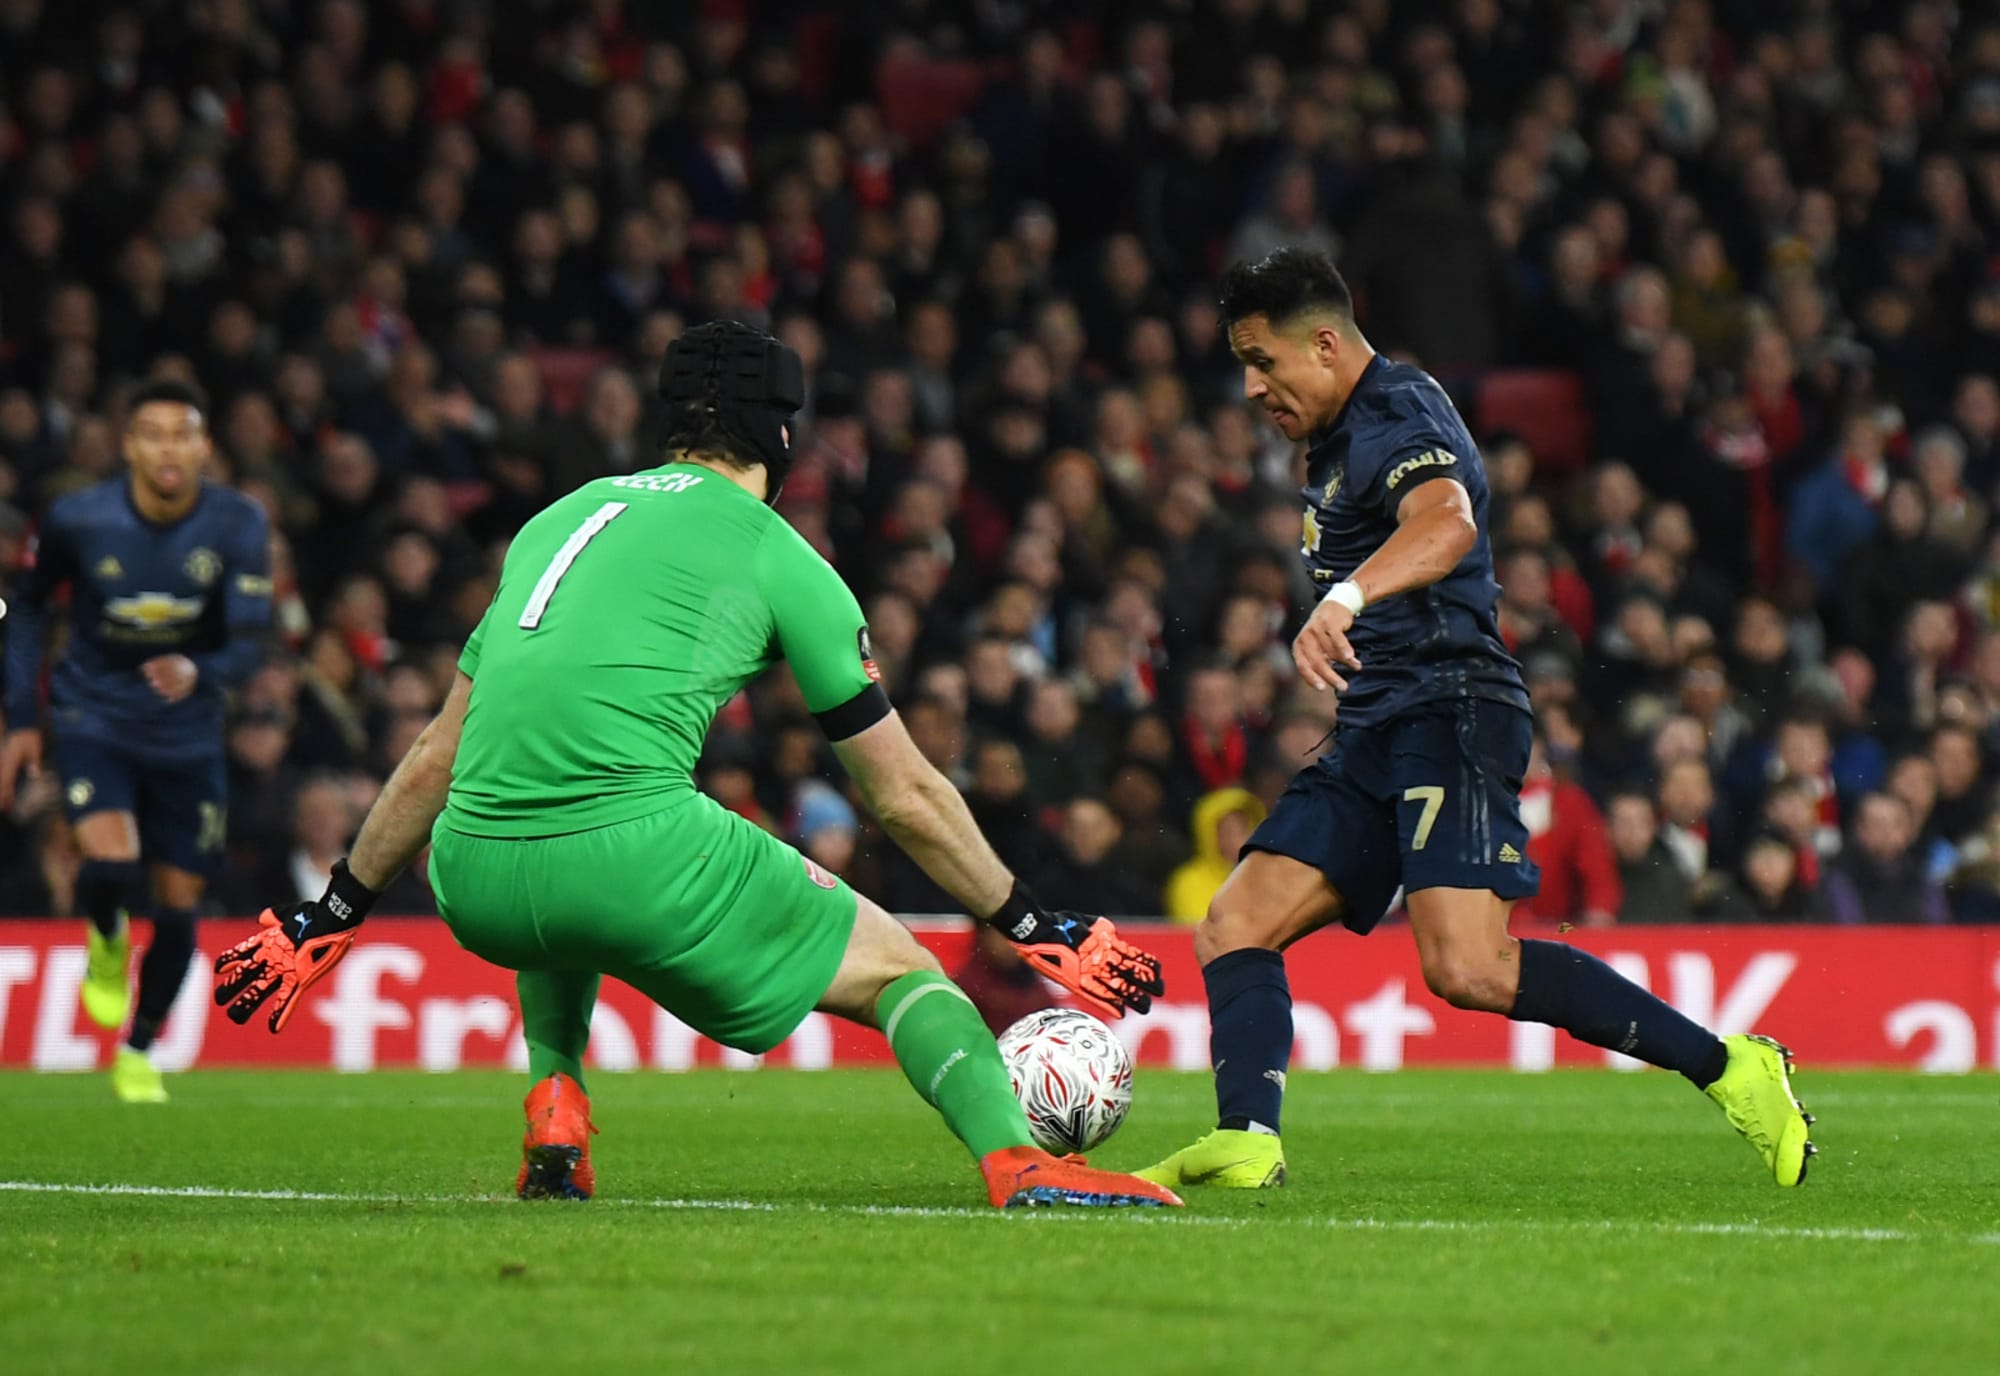 3 things learnt from Manchester United's devastating 3-1 win vs Arsenal